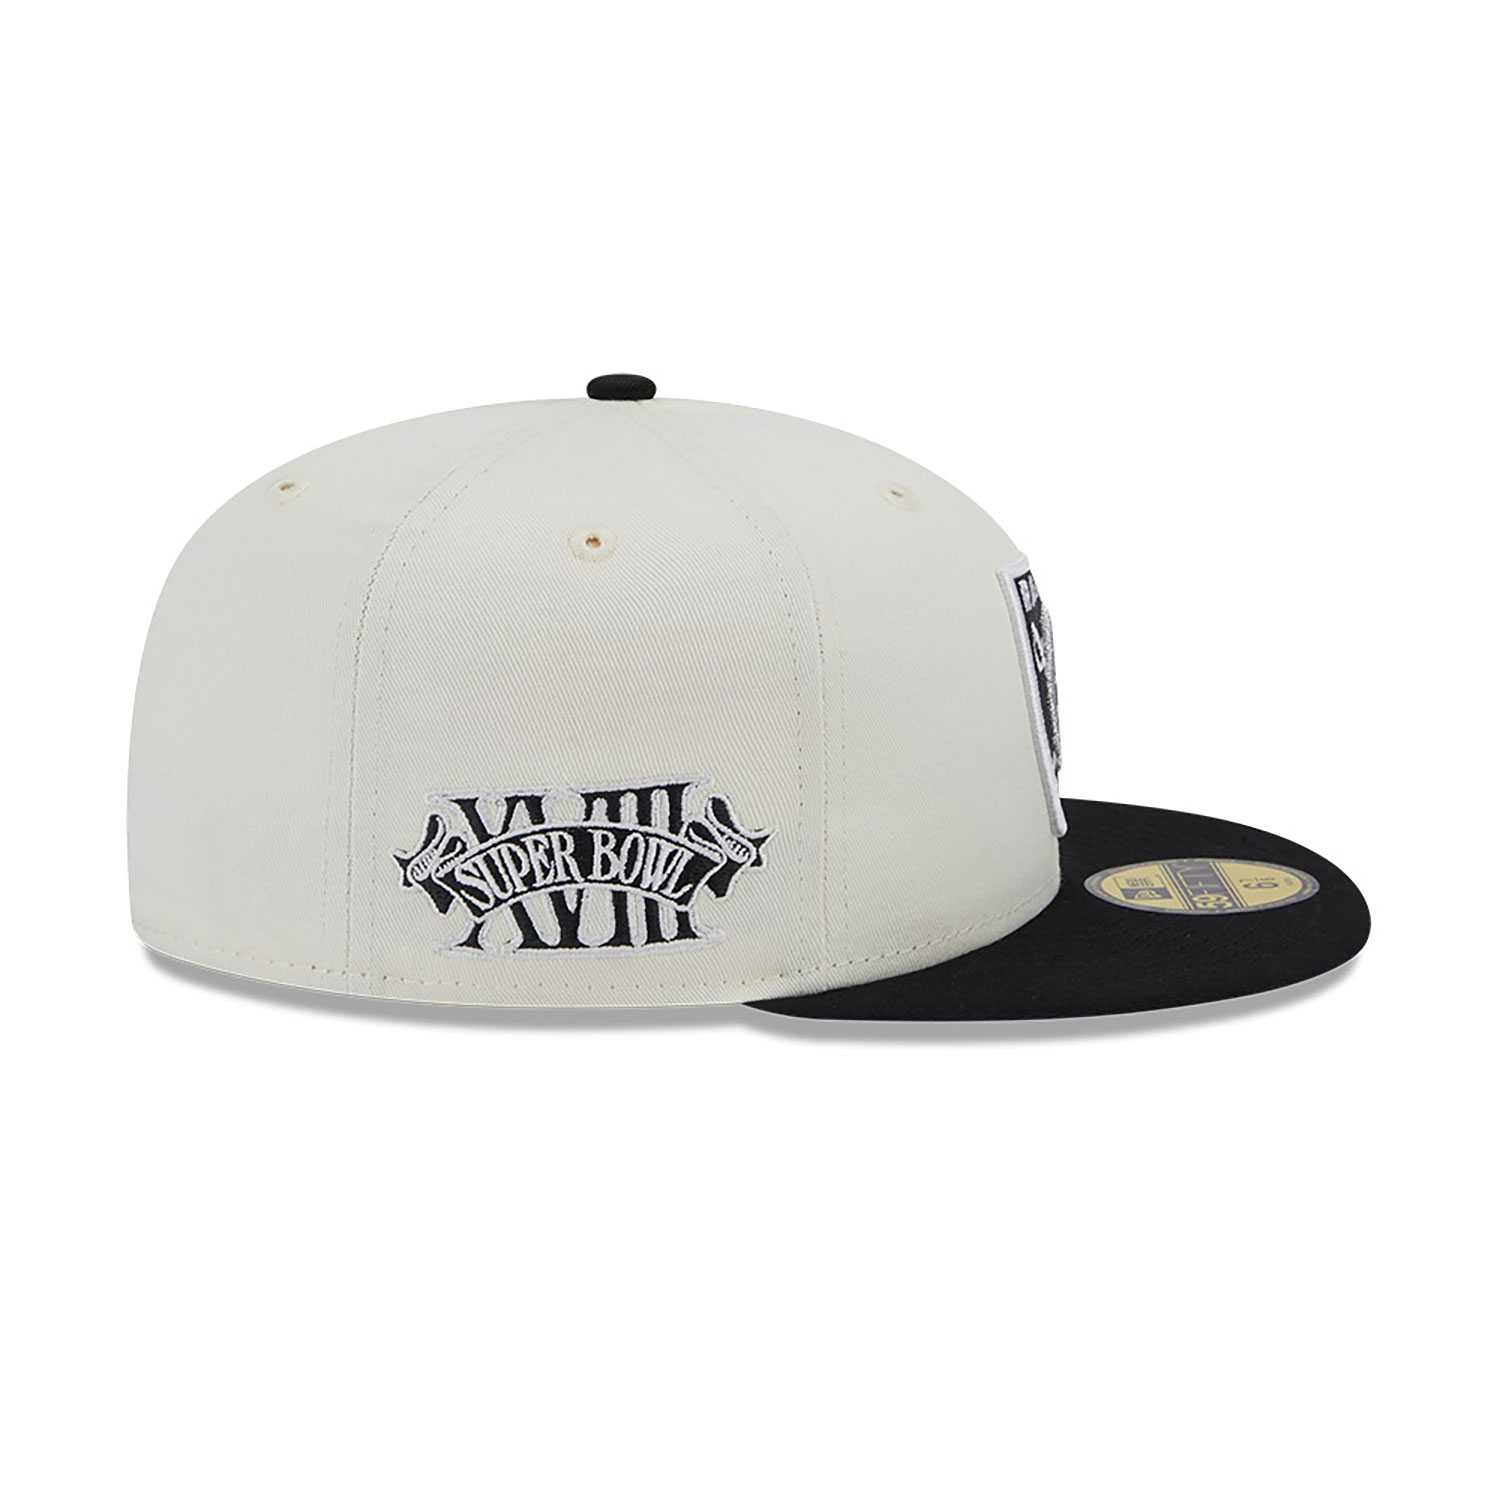 Las Vegas Raiders Chrome White 59FIFTY Fitted Cap